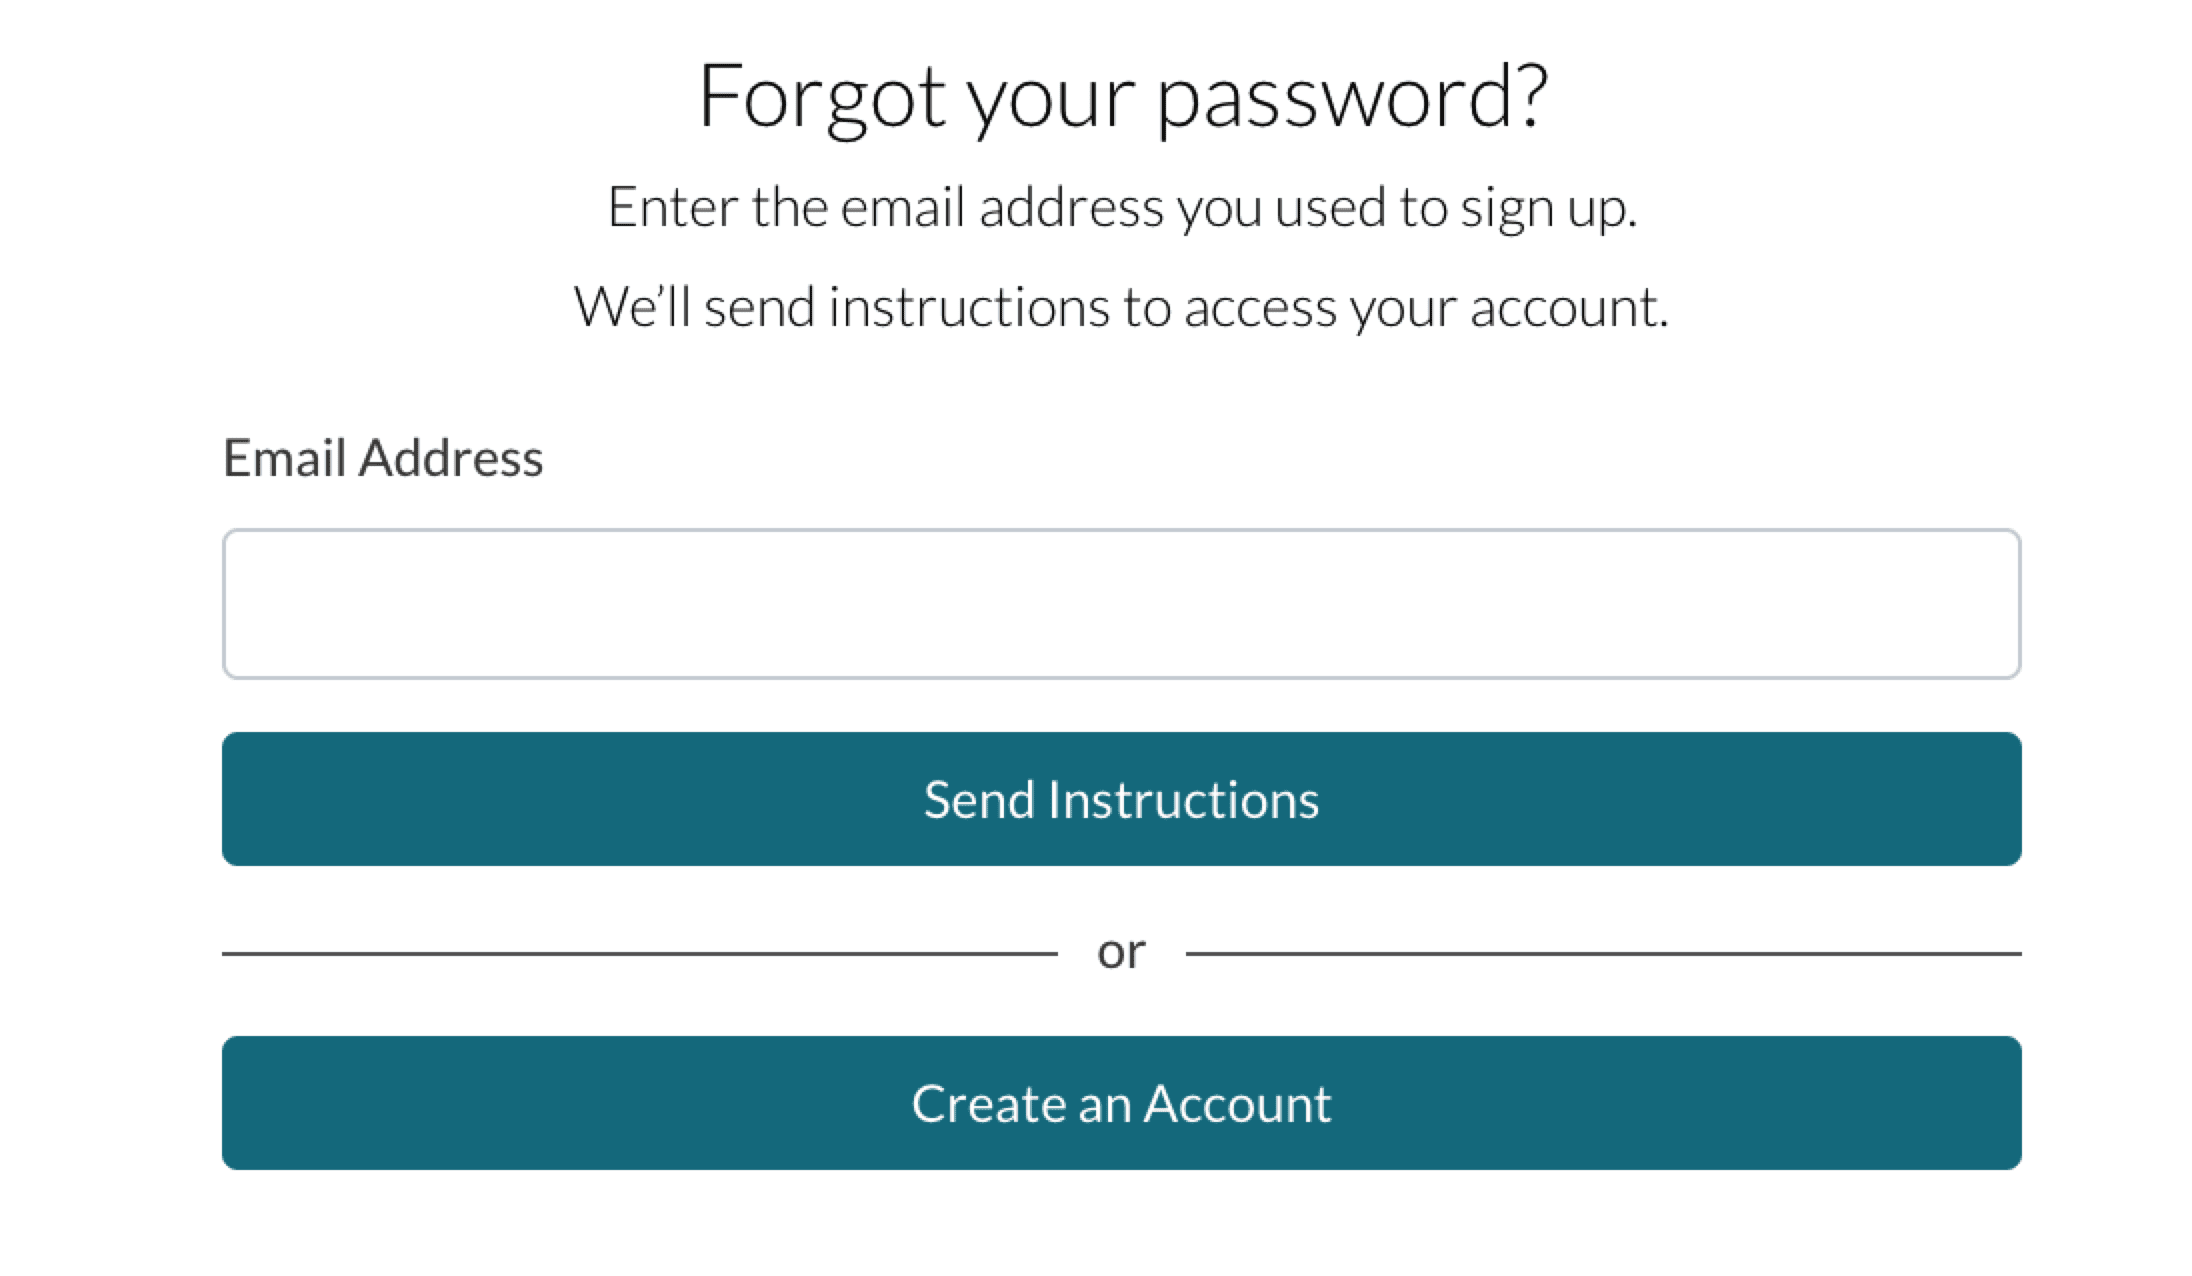 Forgot password page in the parent portal